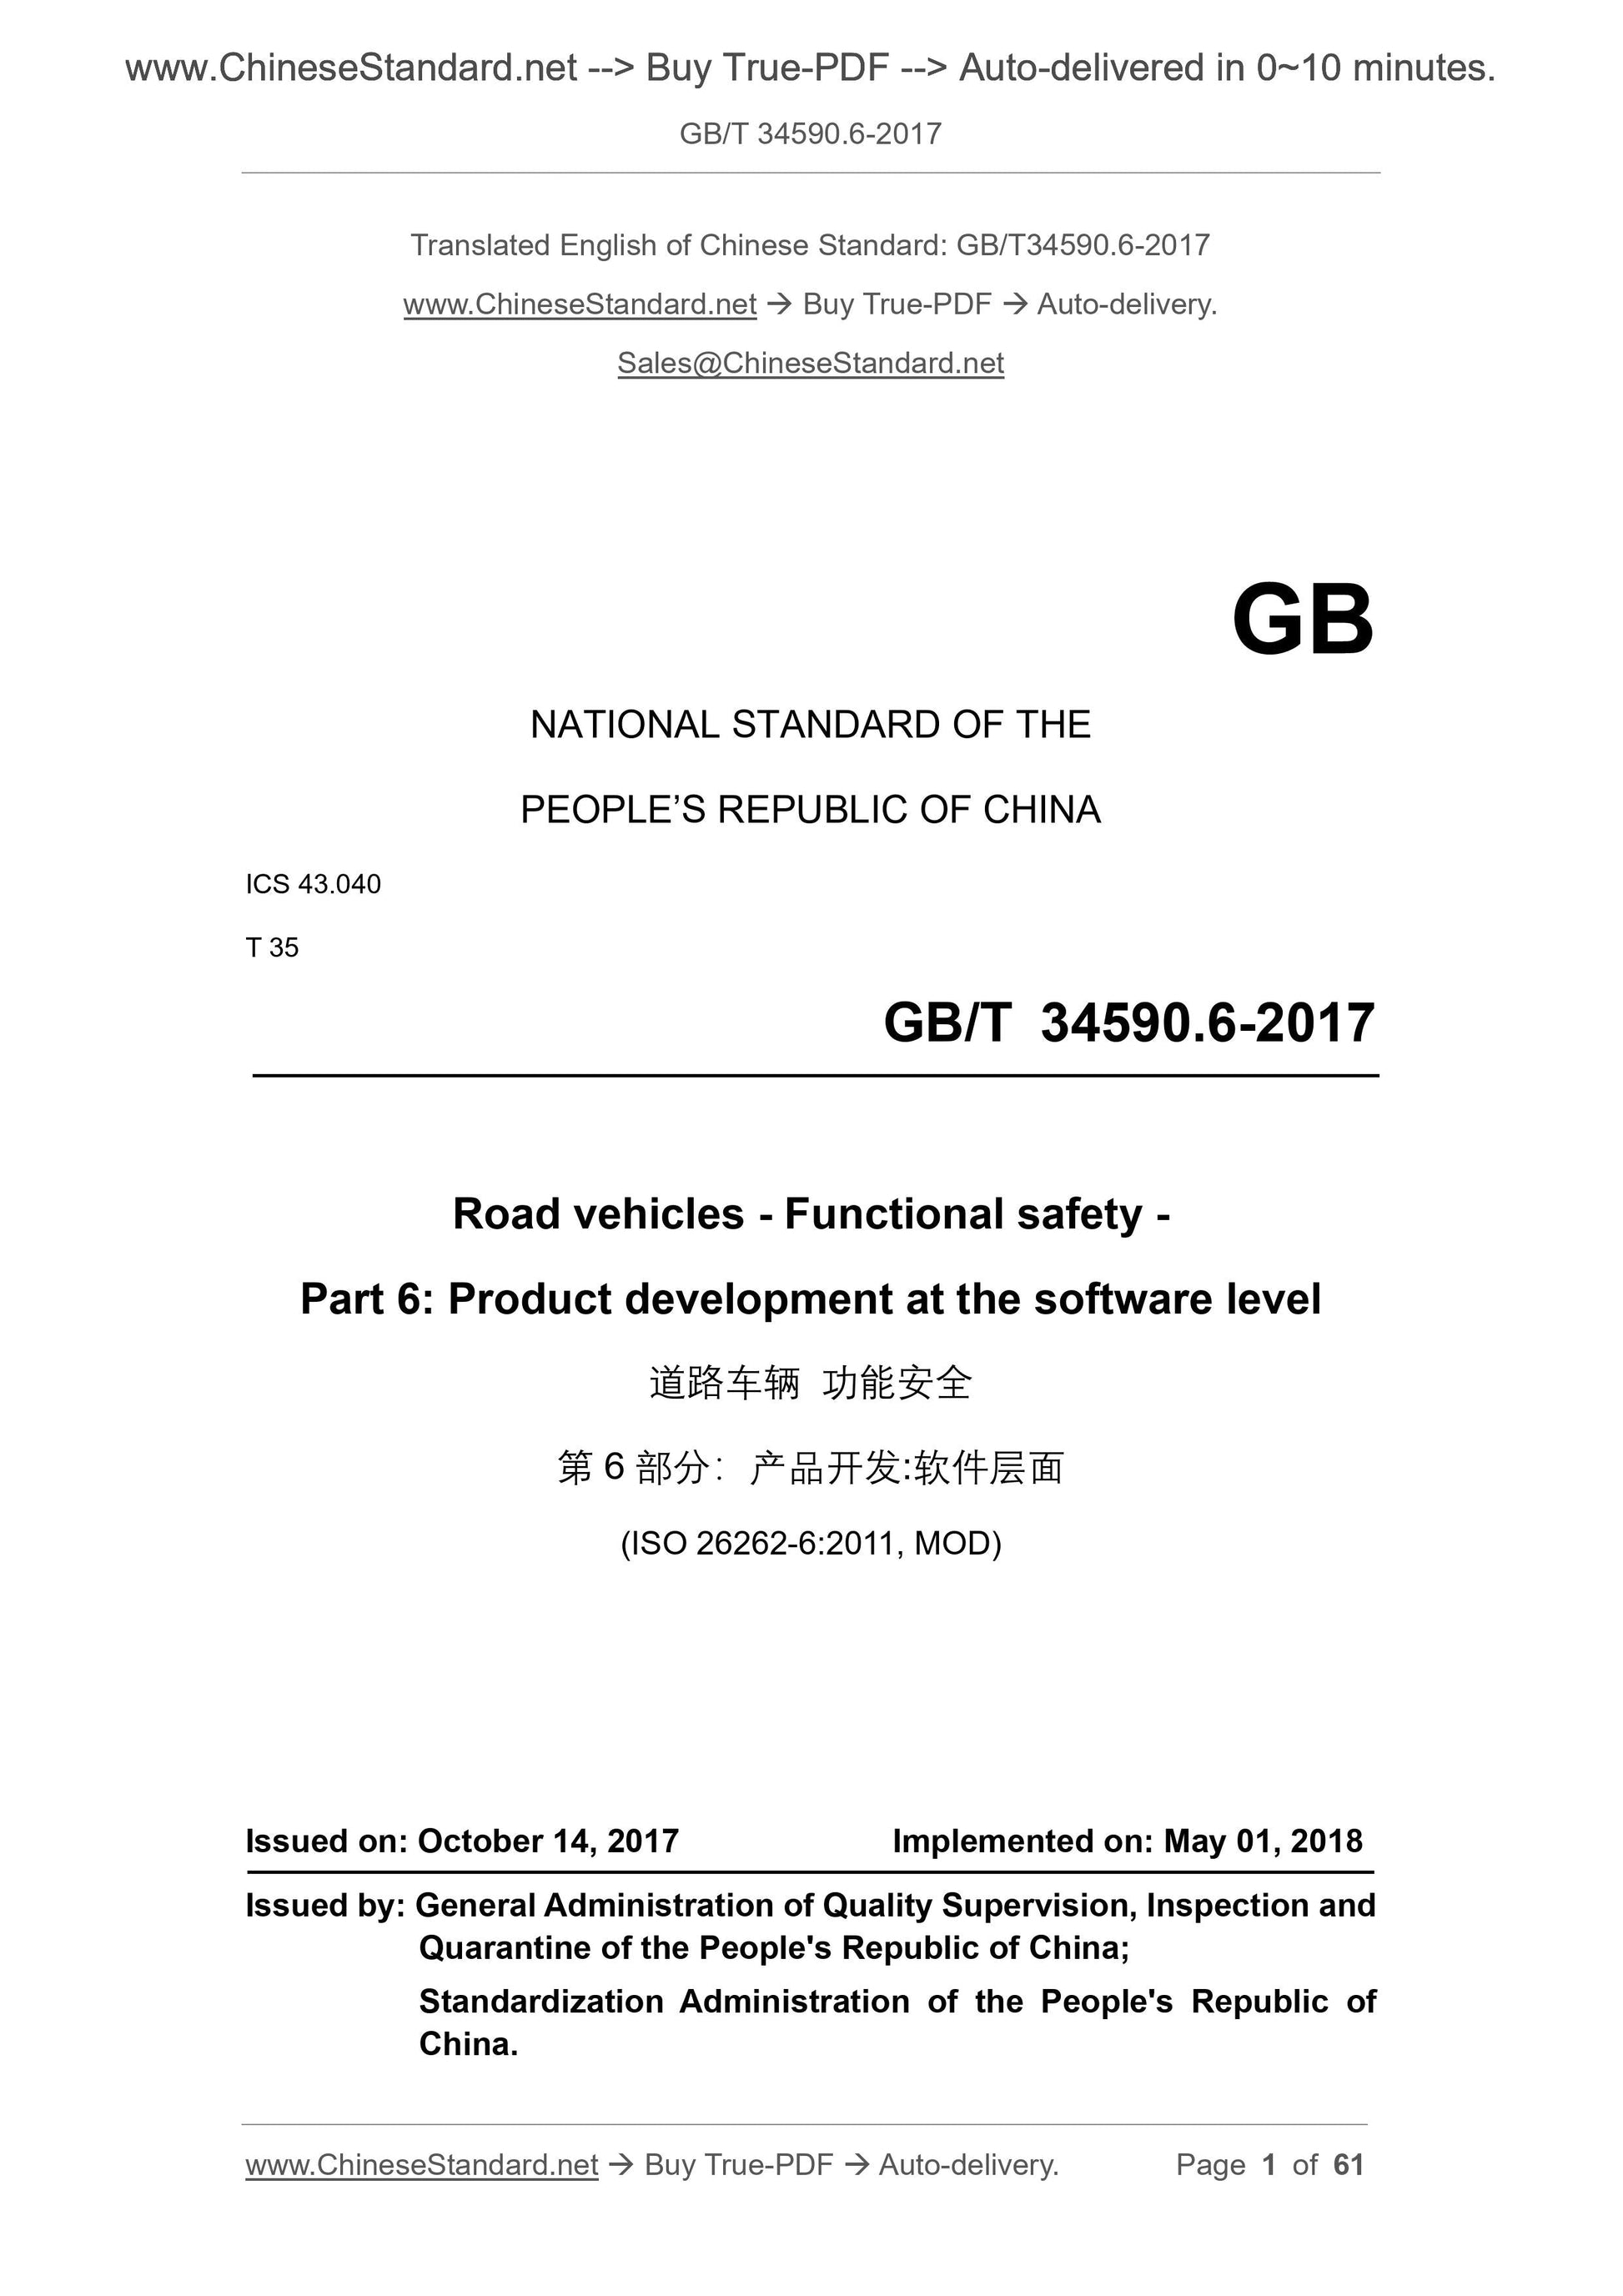 GB/T 34590.6-2017 Page 1